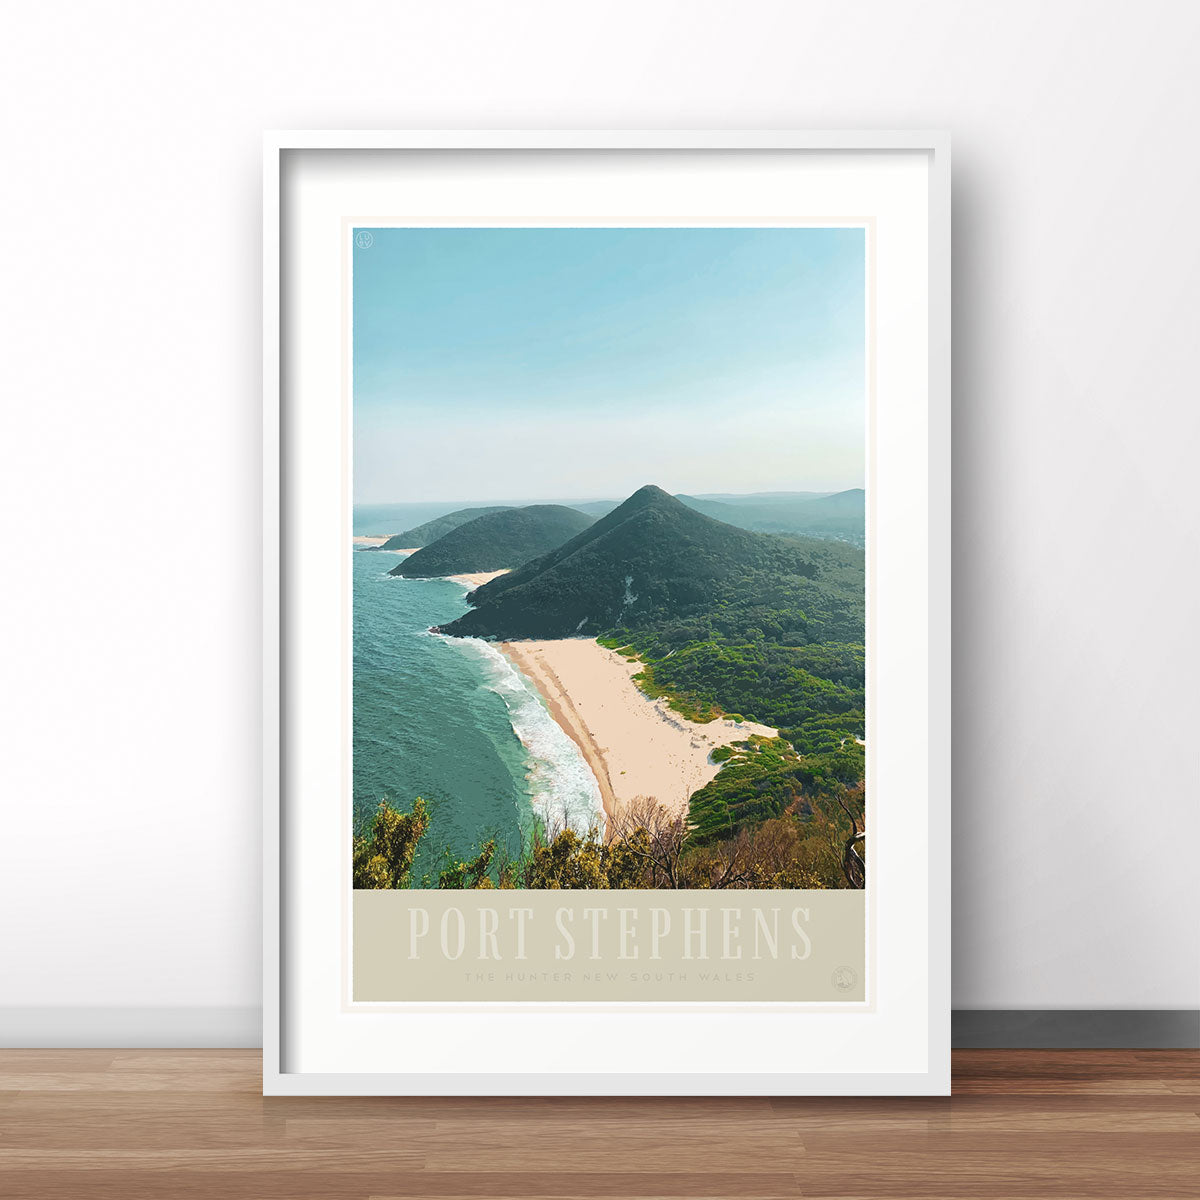 Port Stephens vintage retro poster print from Places We Luv